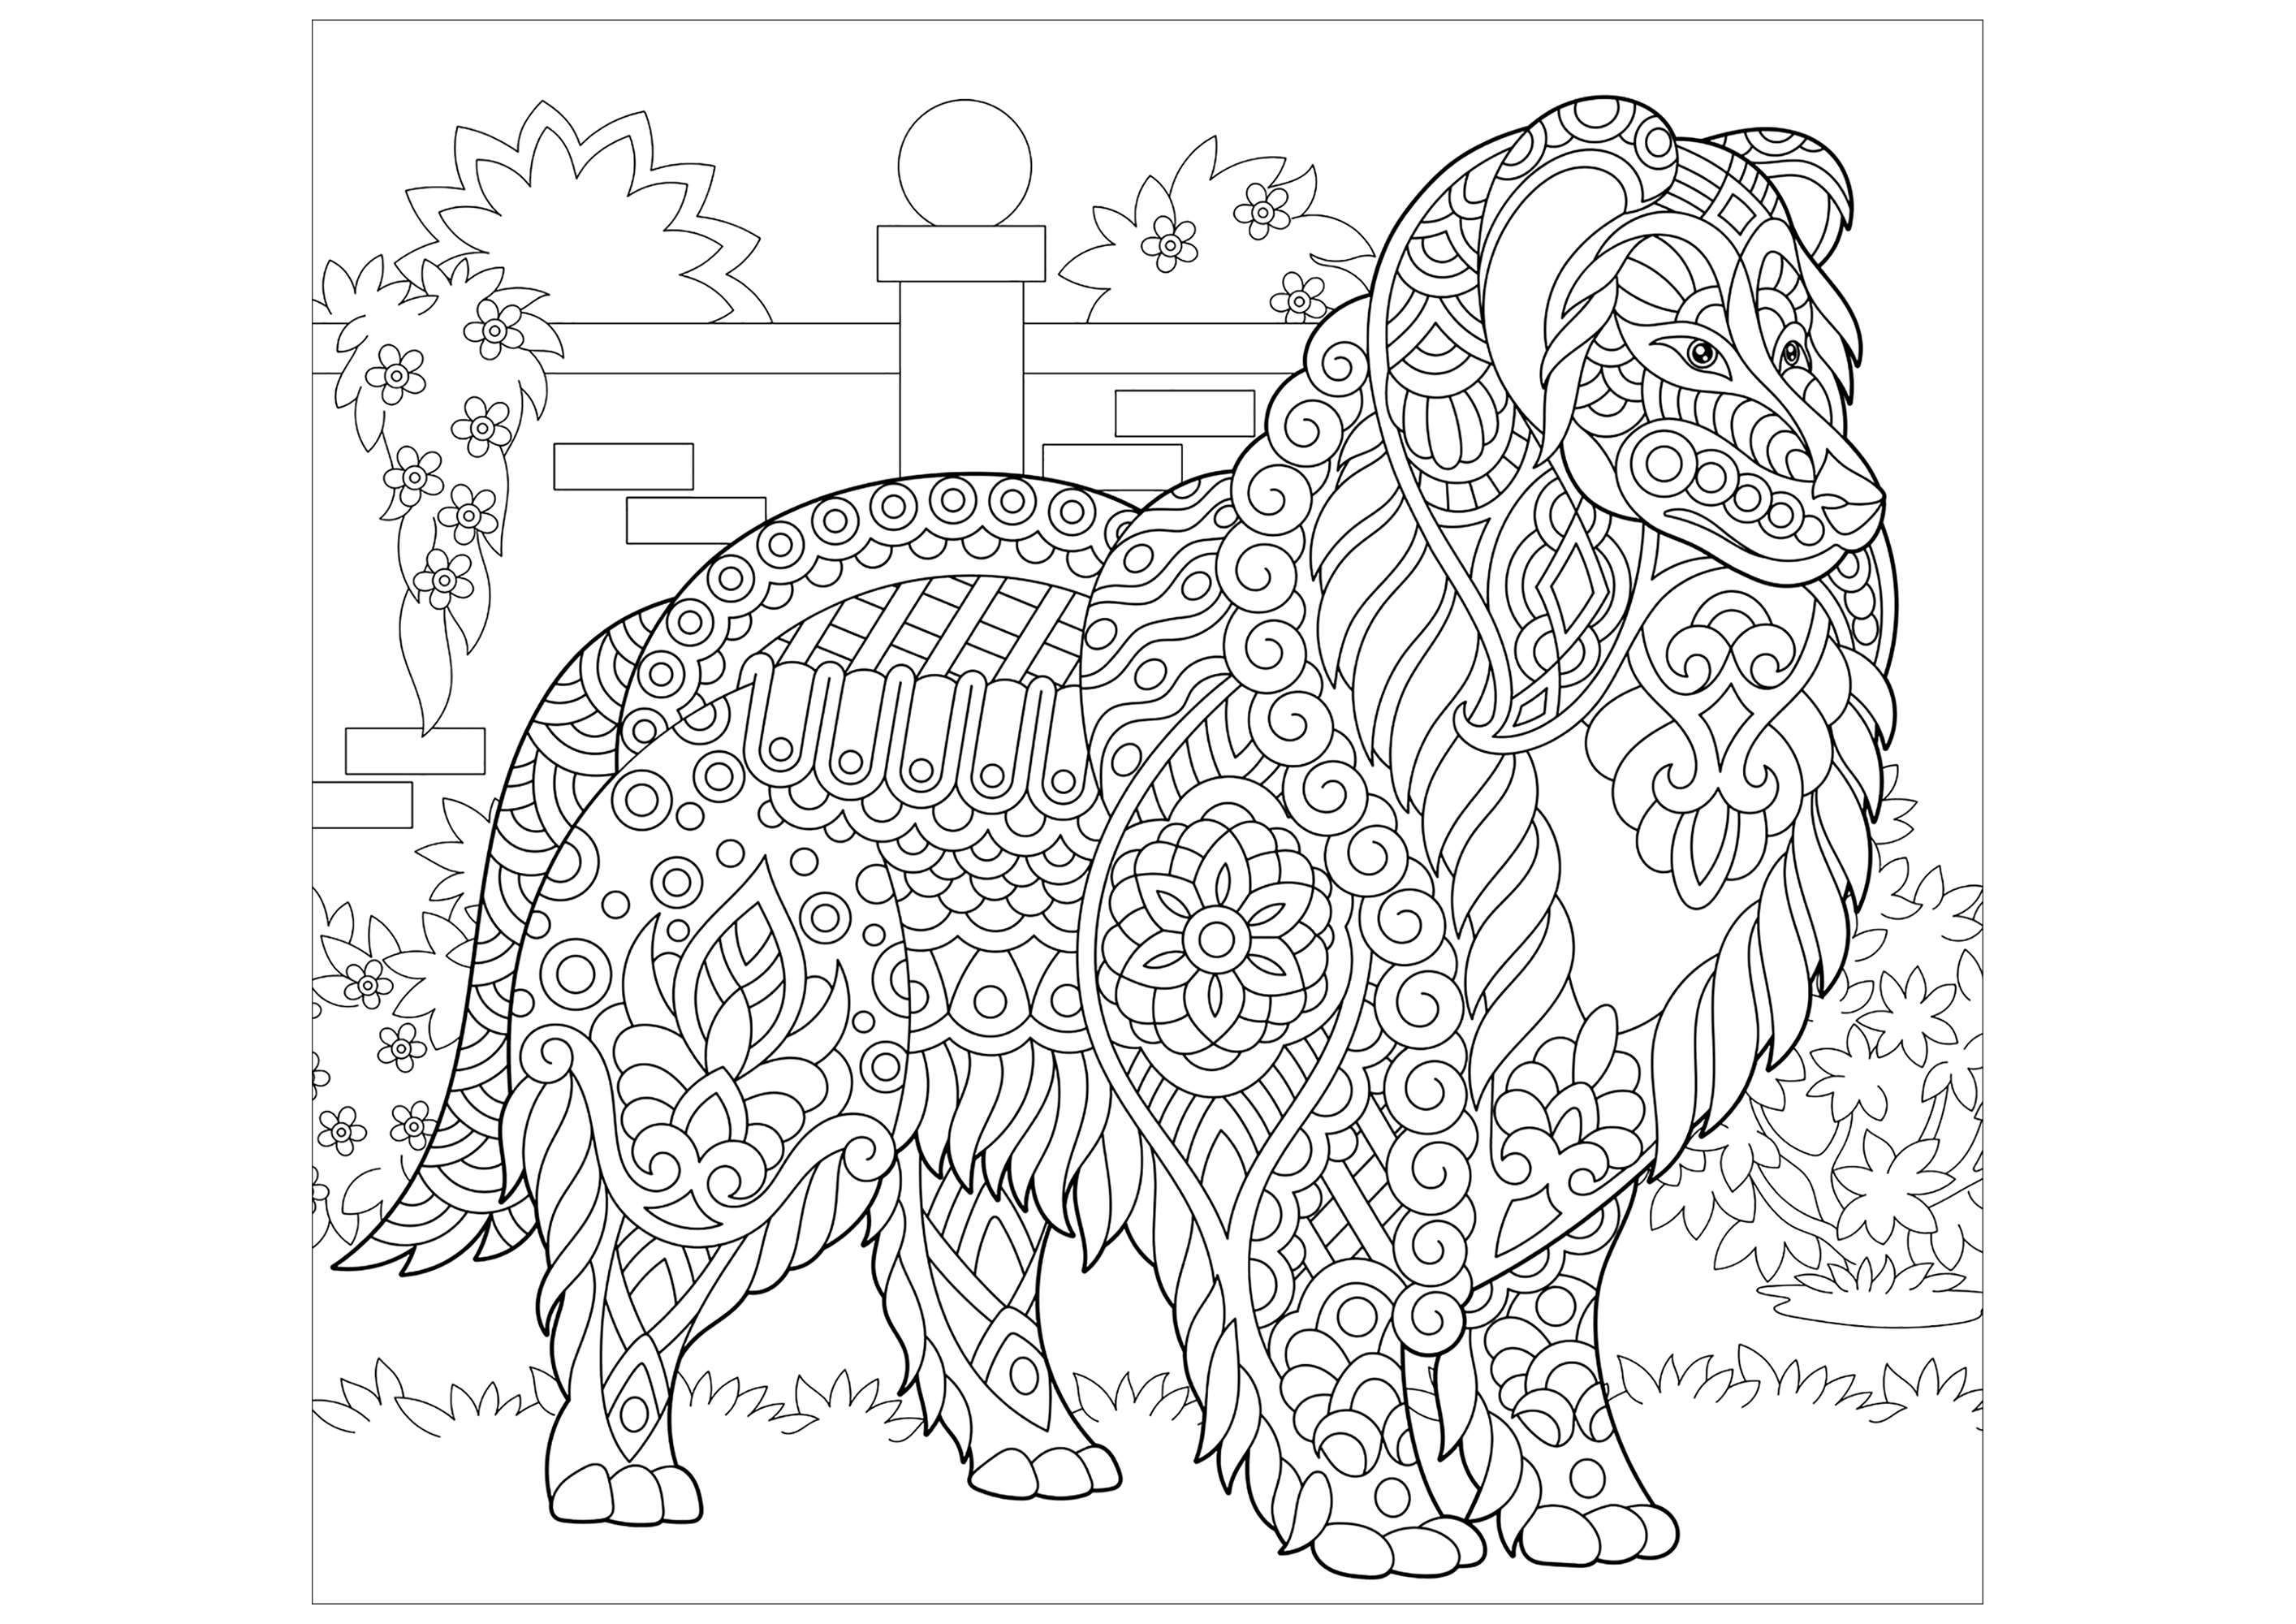 Collie dog - Dogs Adult Coloring Pages